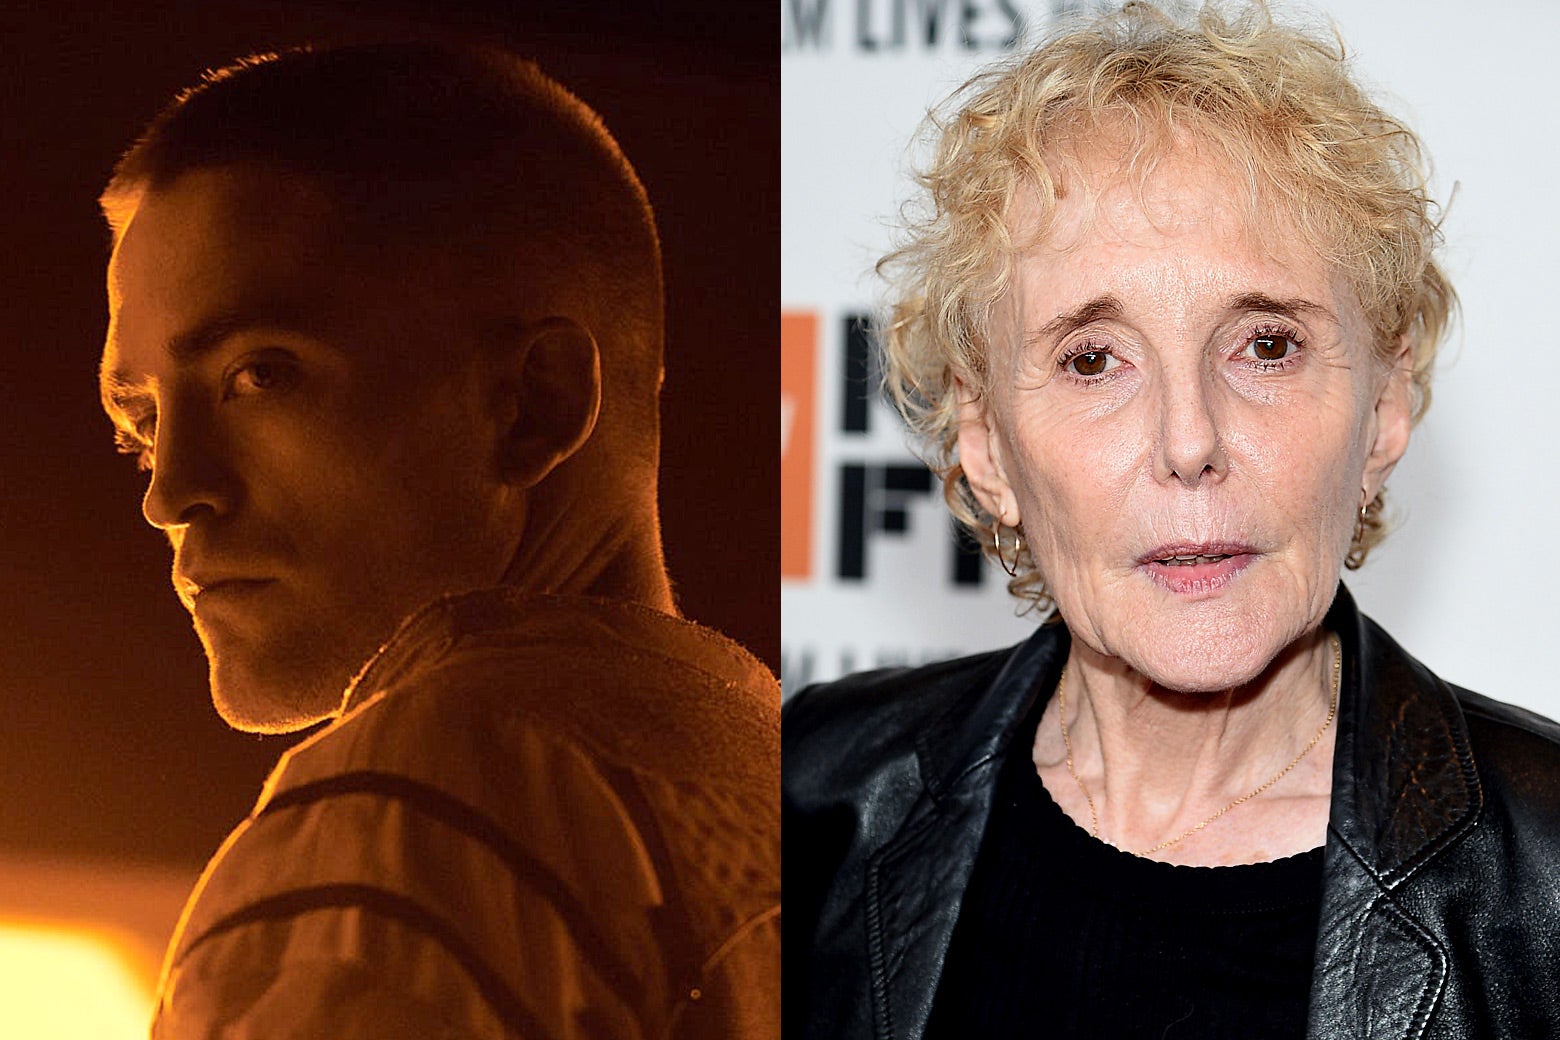 Robert Pattinson in High Life and director Claire Denis.